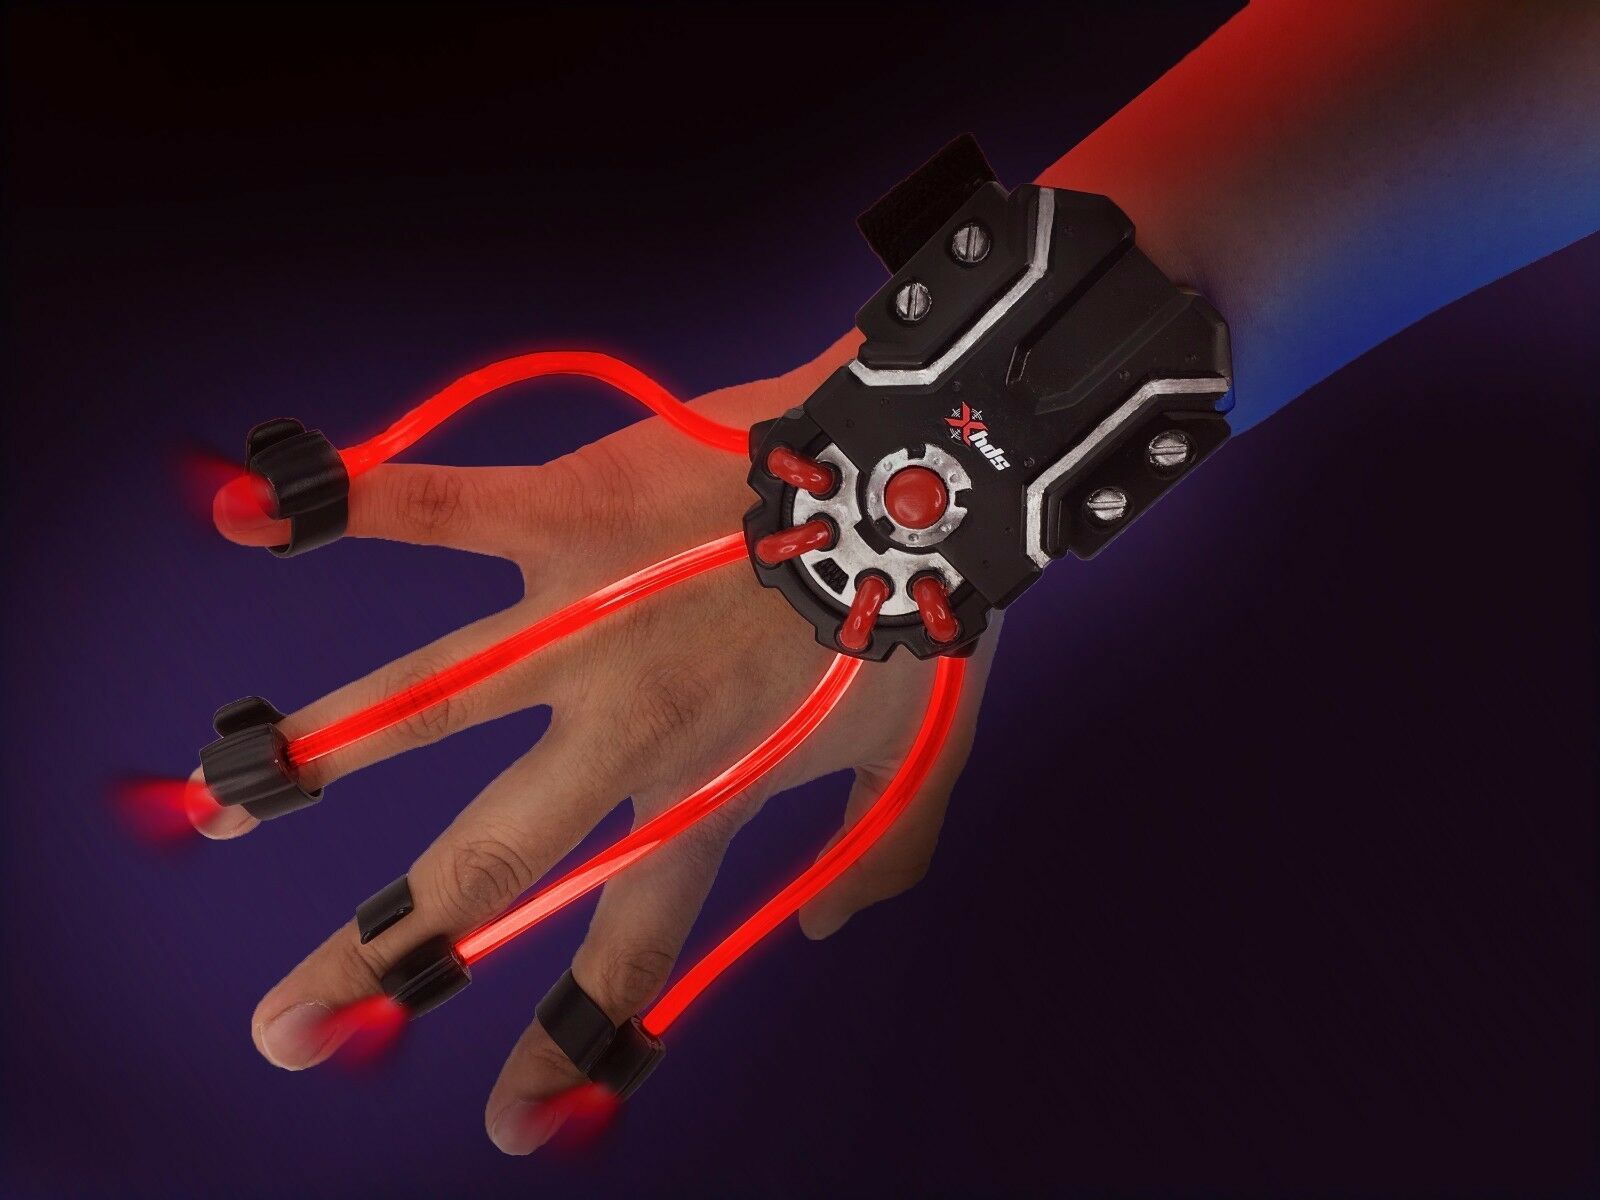 SpyX Light Hand- Use Your Hand As A Light In The Dark- Become The Ultimate Spy